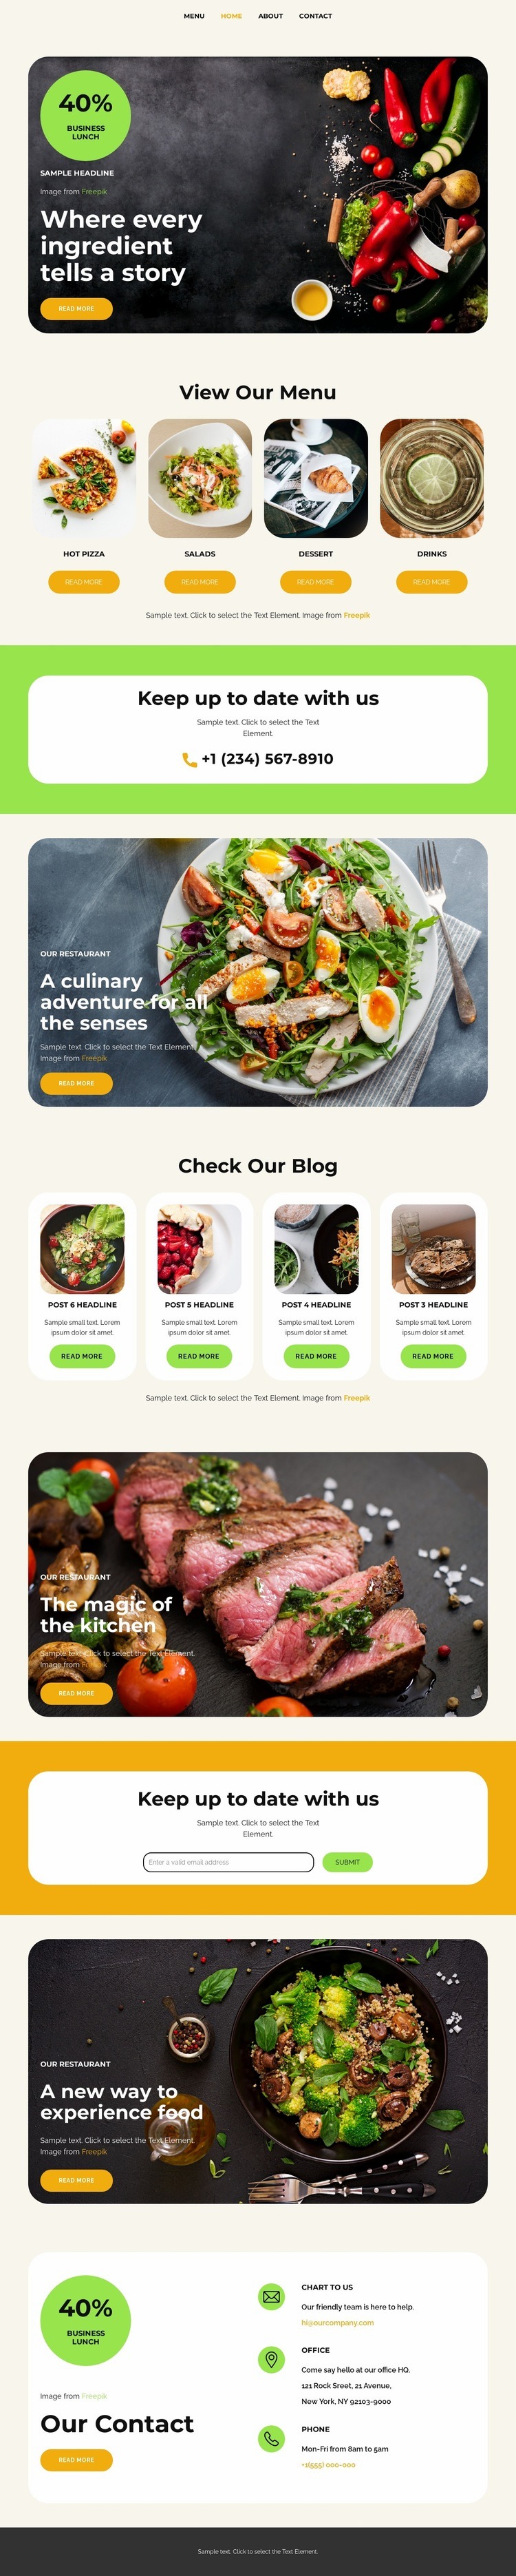 The magic of the kitchen Webflow Template Alternative